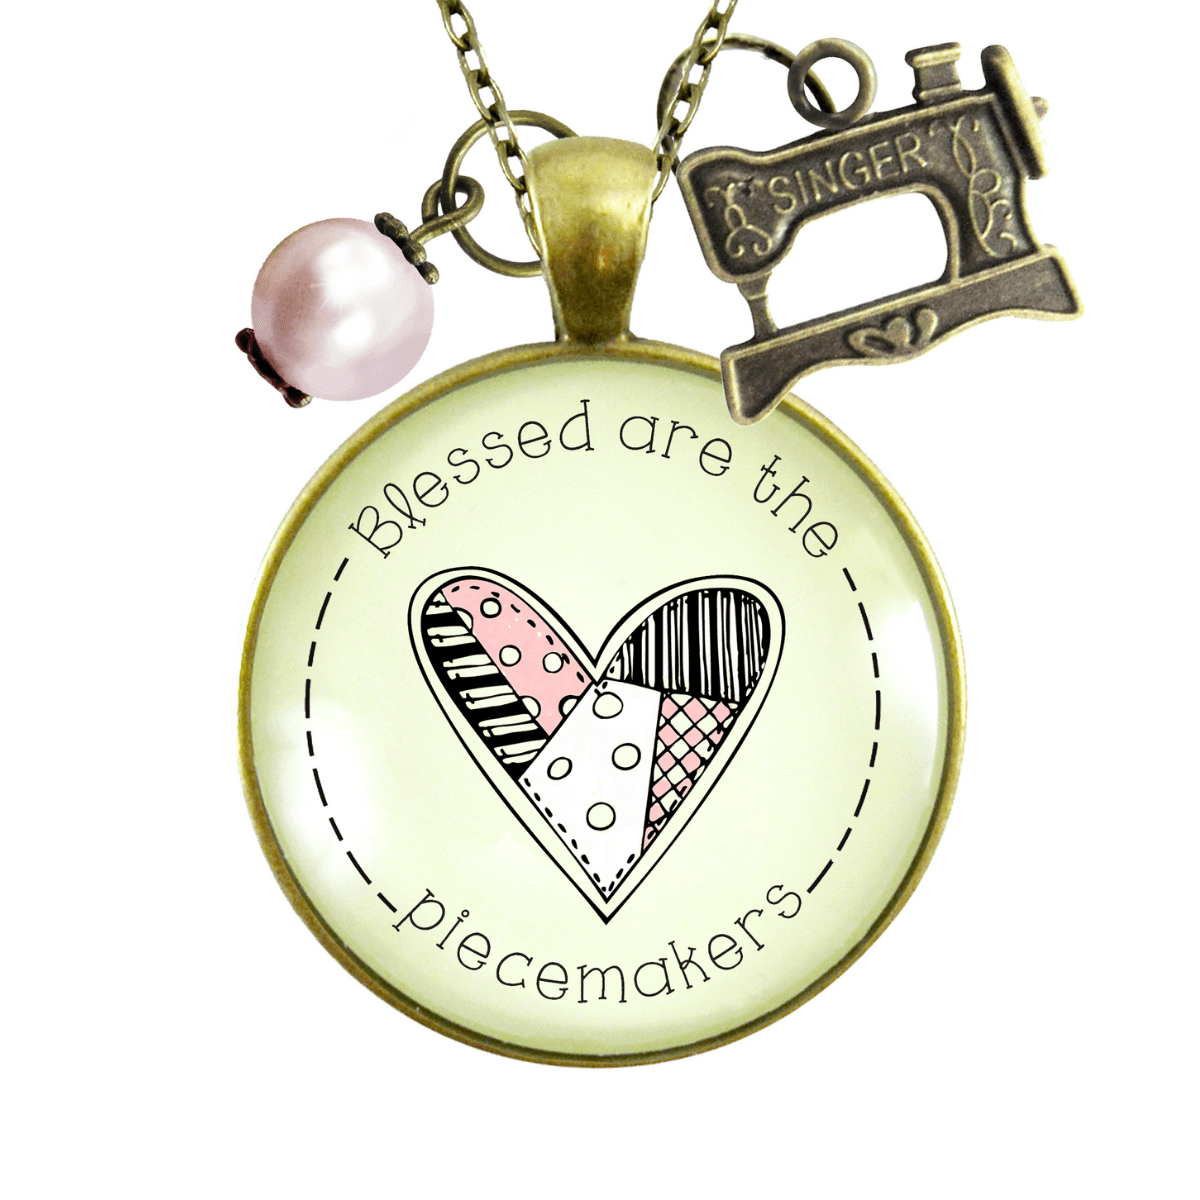 Gutsy Goodness Blessed are Piecemakers Necklace Quilter Faith Word Jewelry Sew Charm - Gutsy Goodness;Blessed Are Piecemakers Necklace Quilter Faith Word Jewelry Sew Charm - Gutsy Goodness Handmade Jewelry Gifts